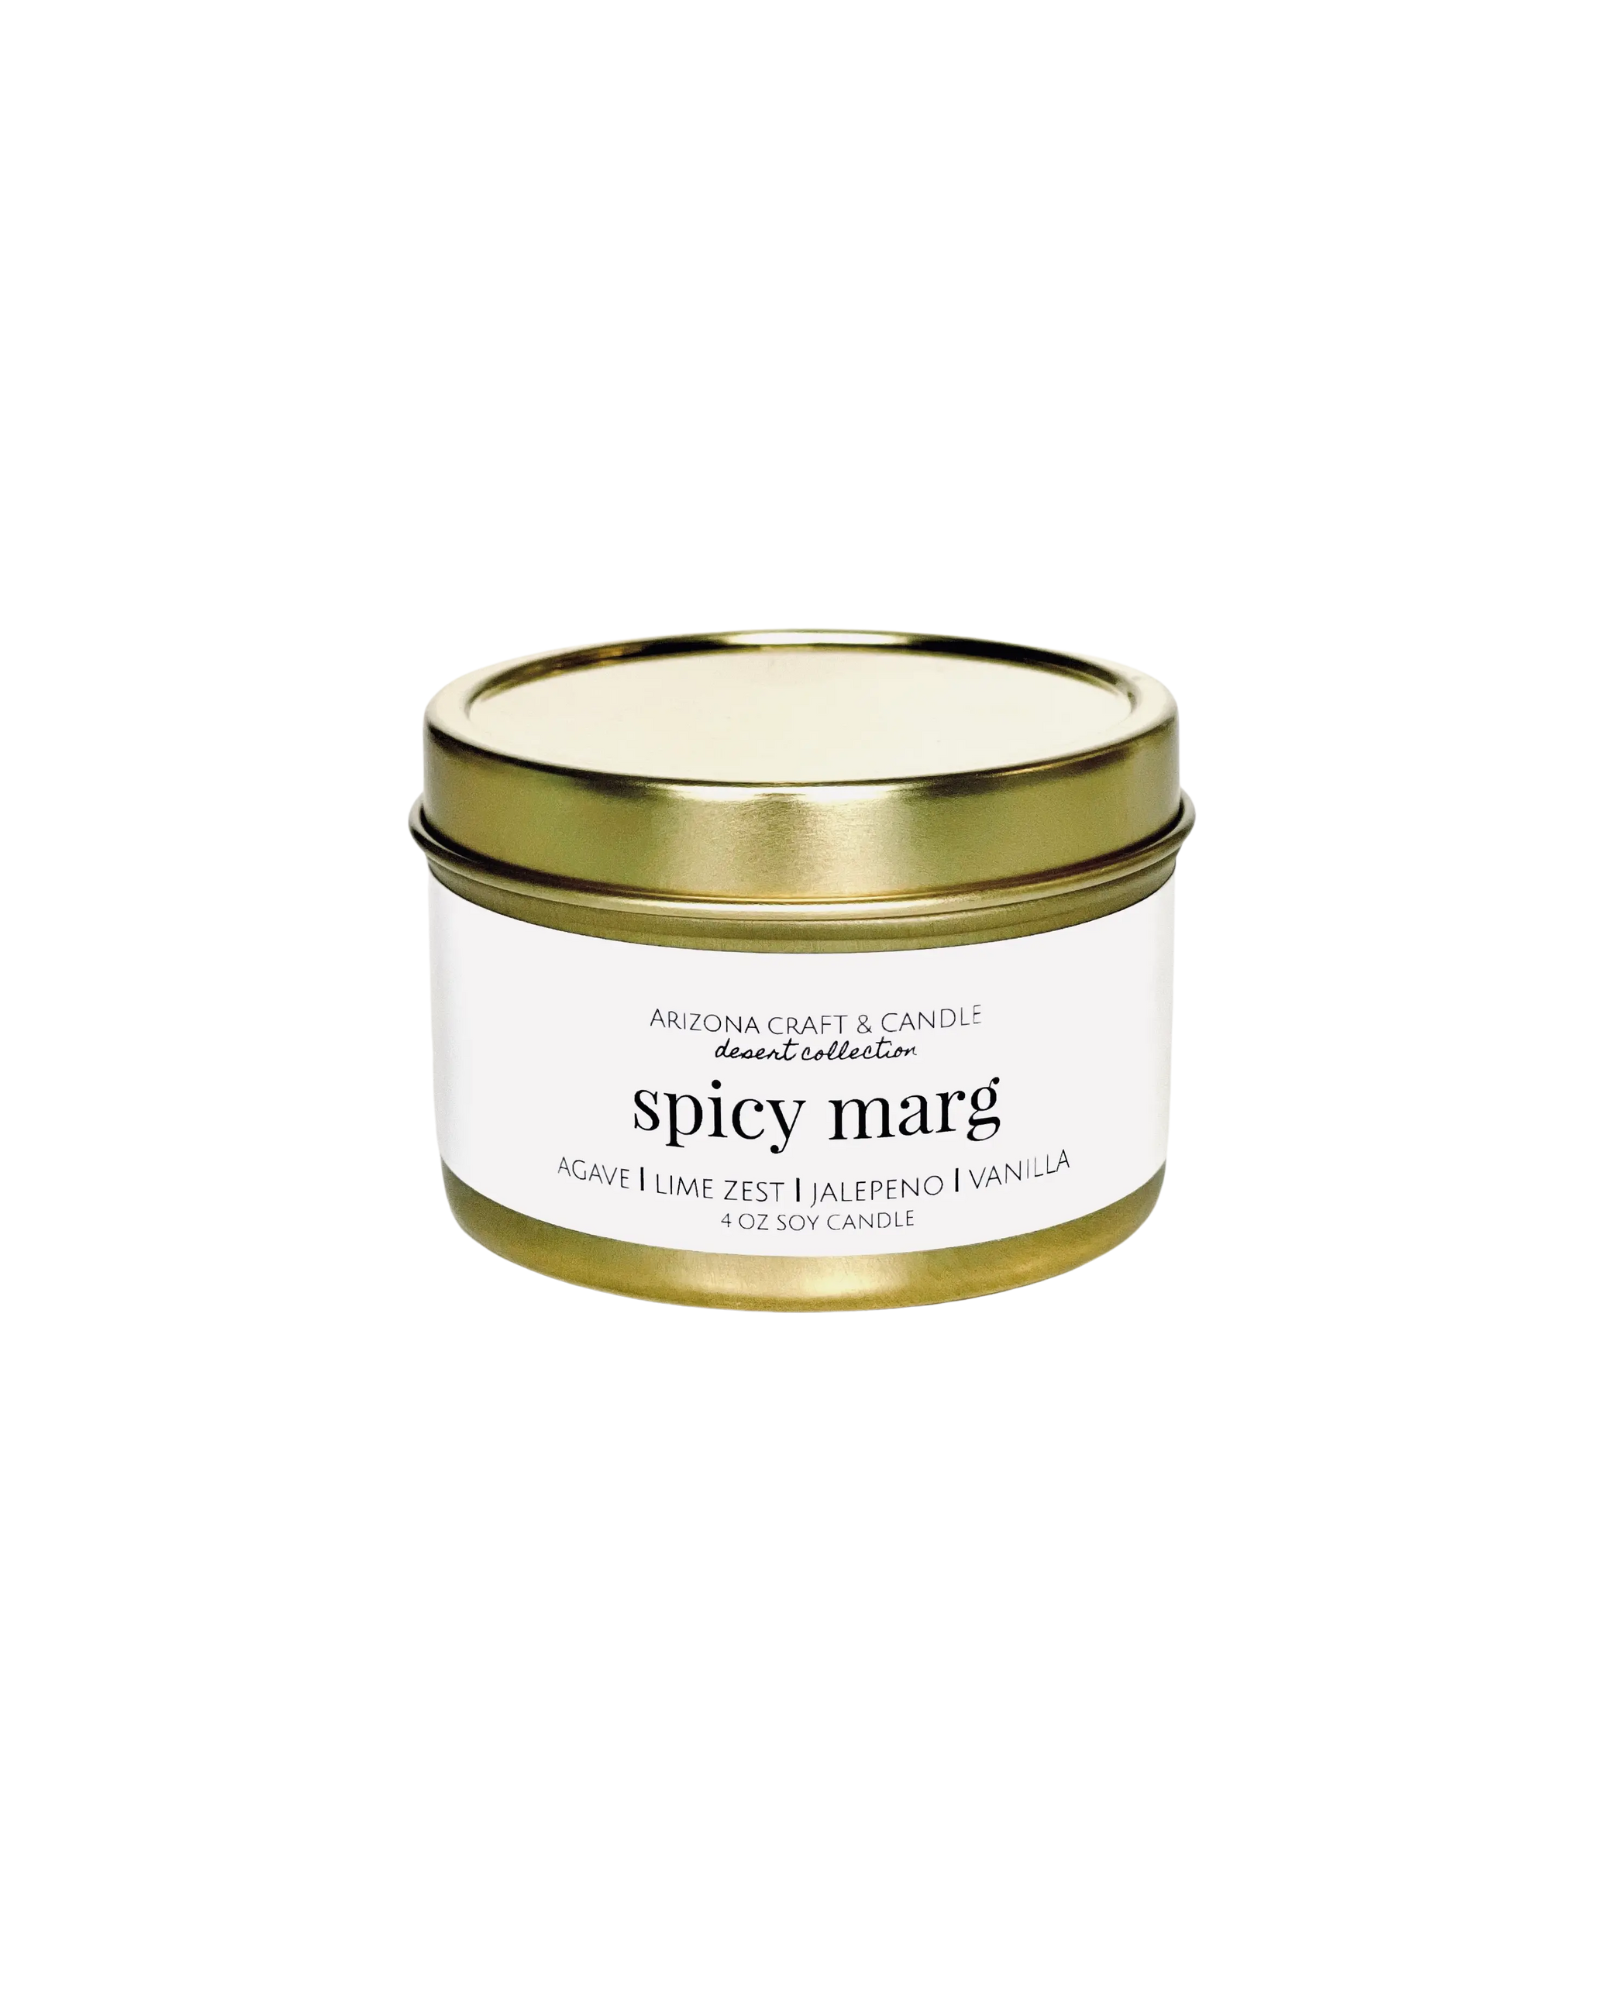 Spicy Marg Travel Candle